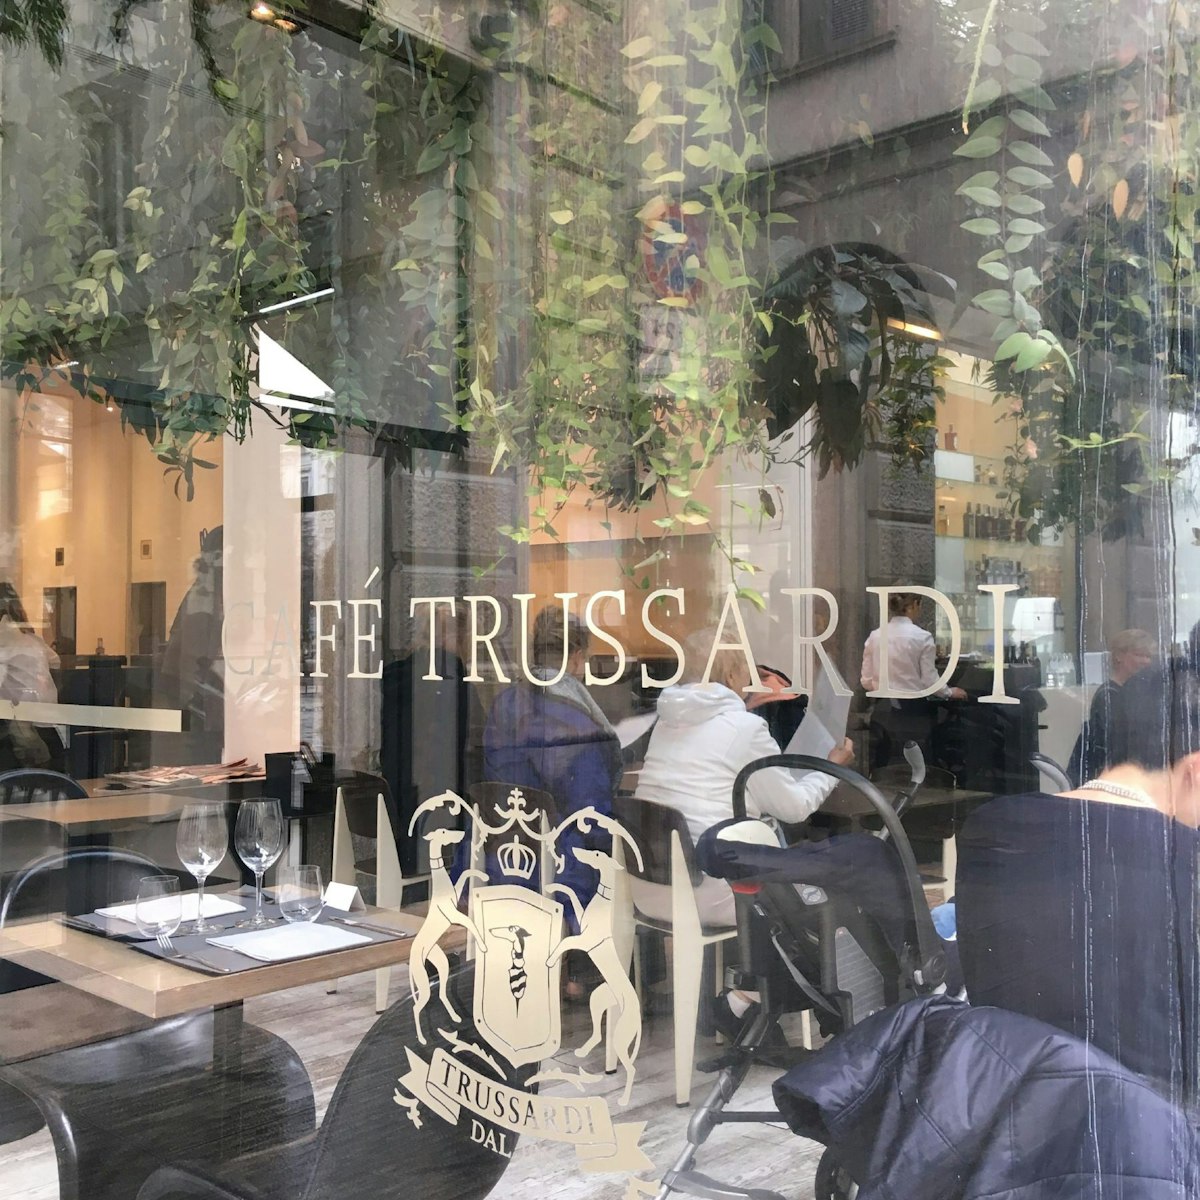 Diners at Cafe Trussardi